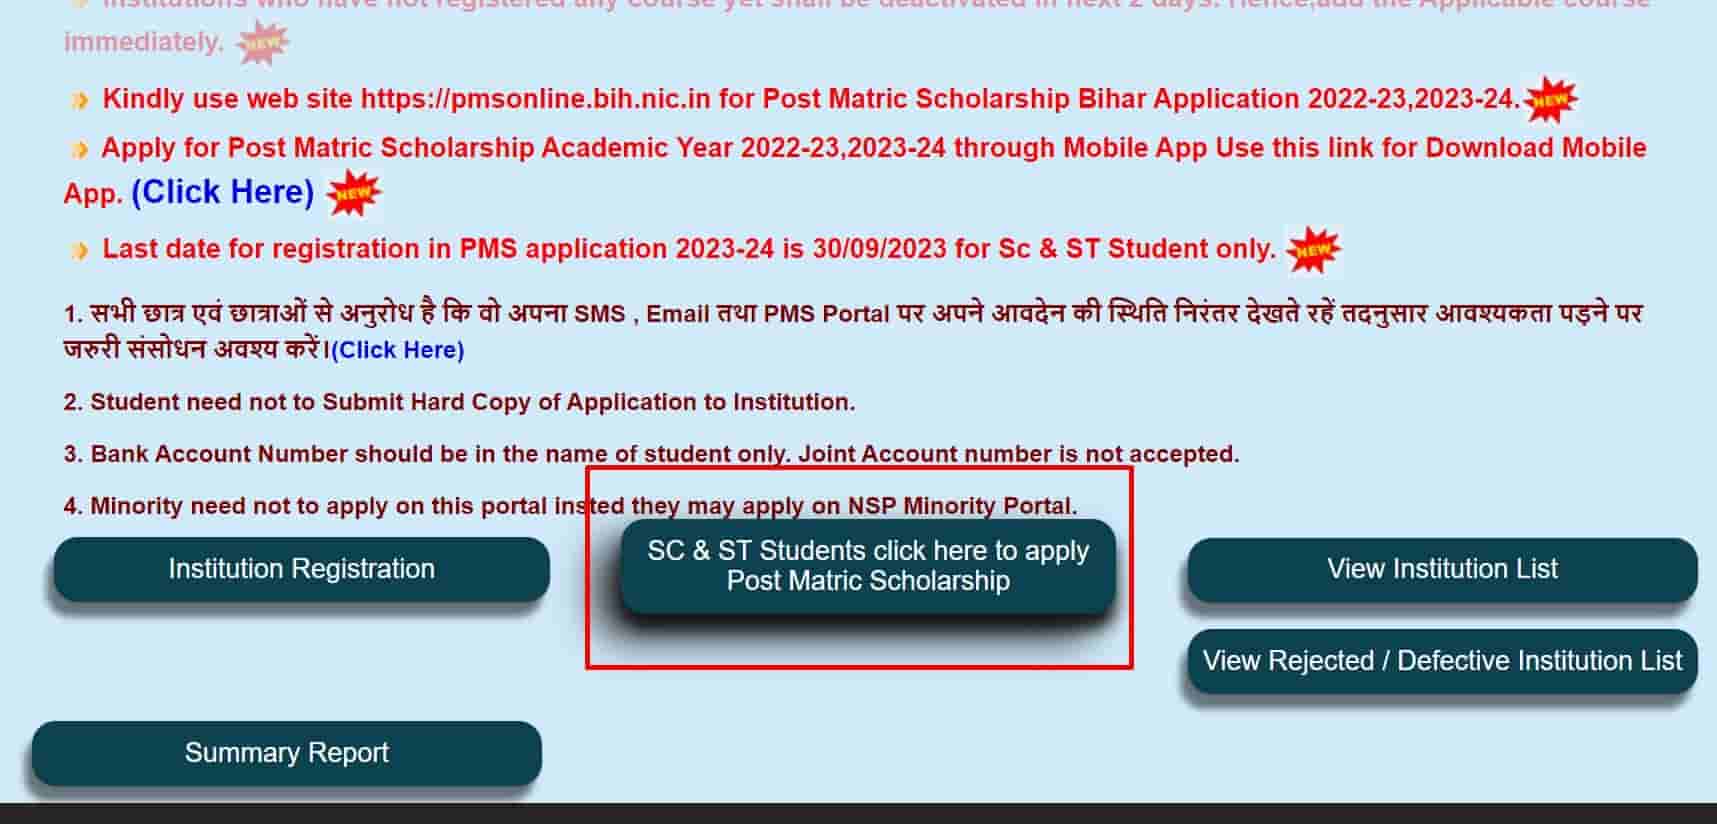 SC & ST Student Click Here To Apply Post Matric Scholarship